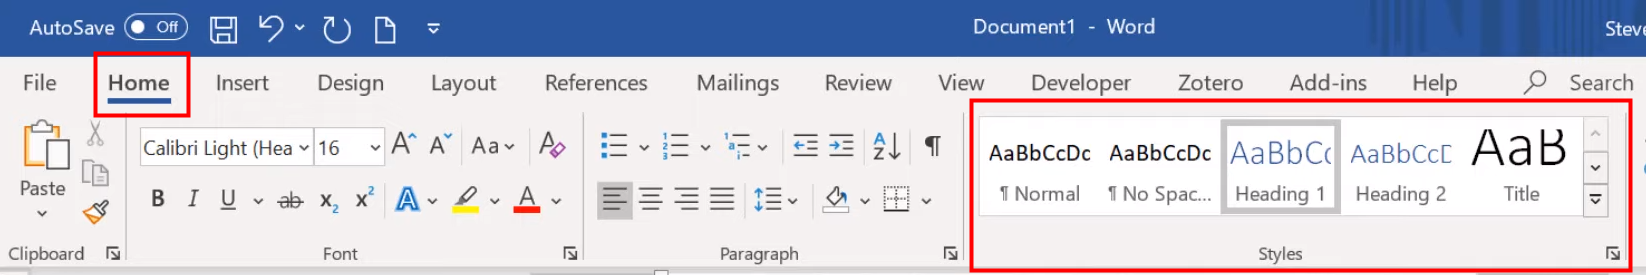 Create a table of contents in Word automatically 1